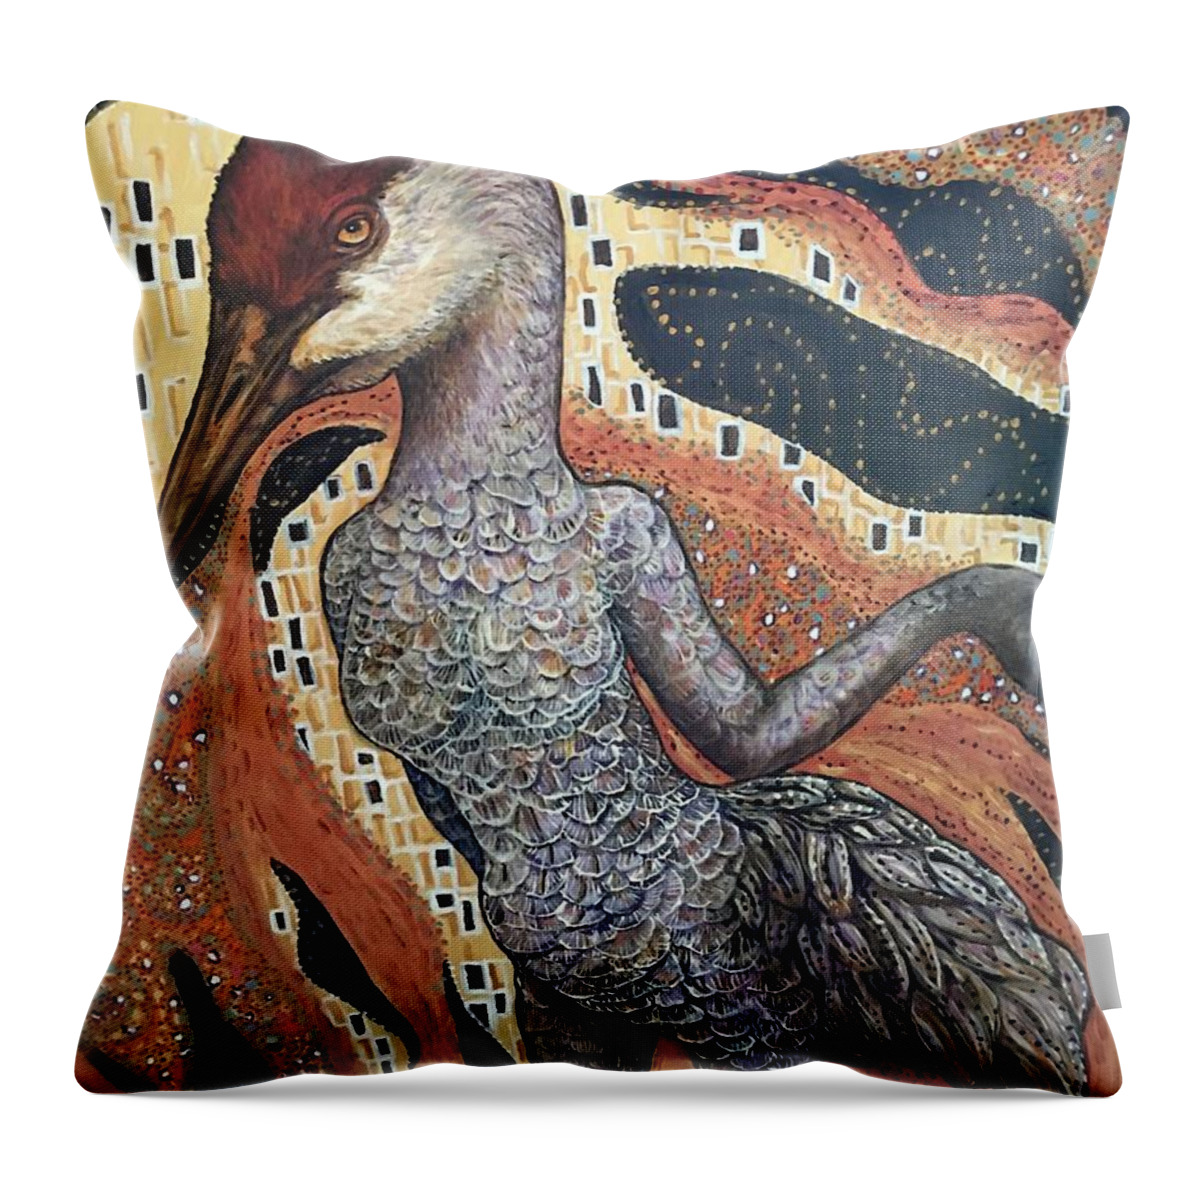 Bird Throw Pillow featuring the painting The Diva by Linda Markwardt